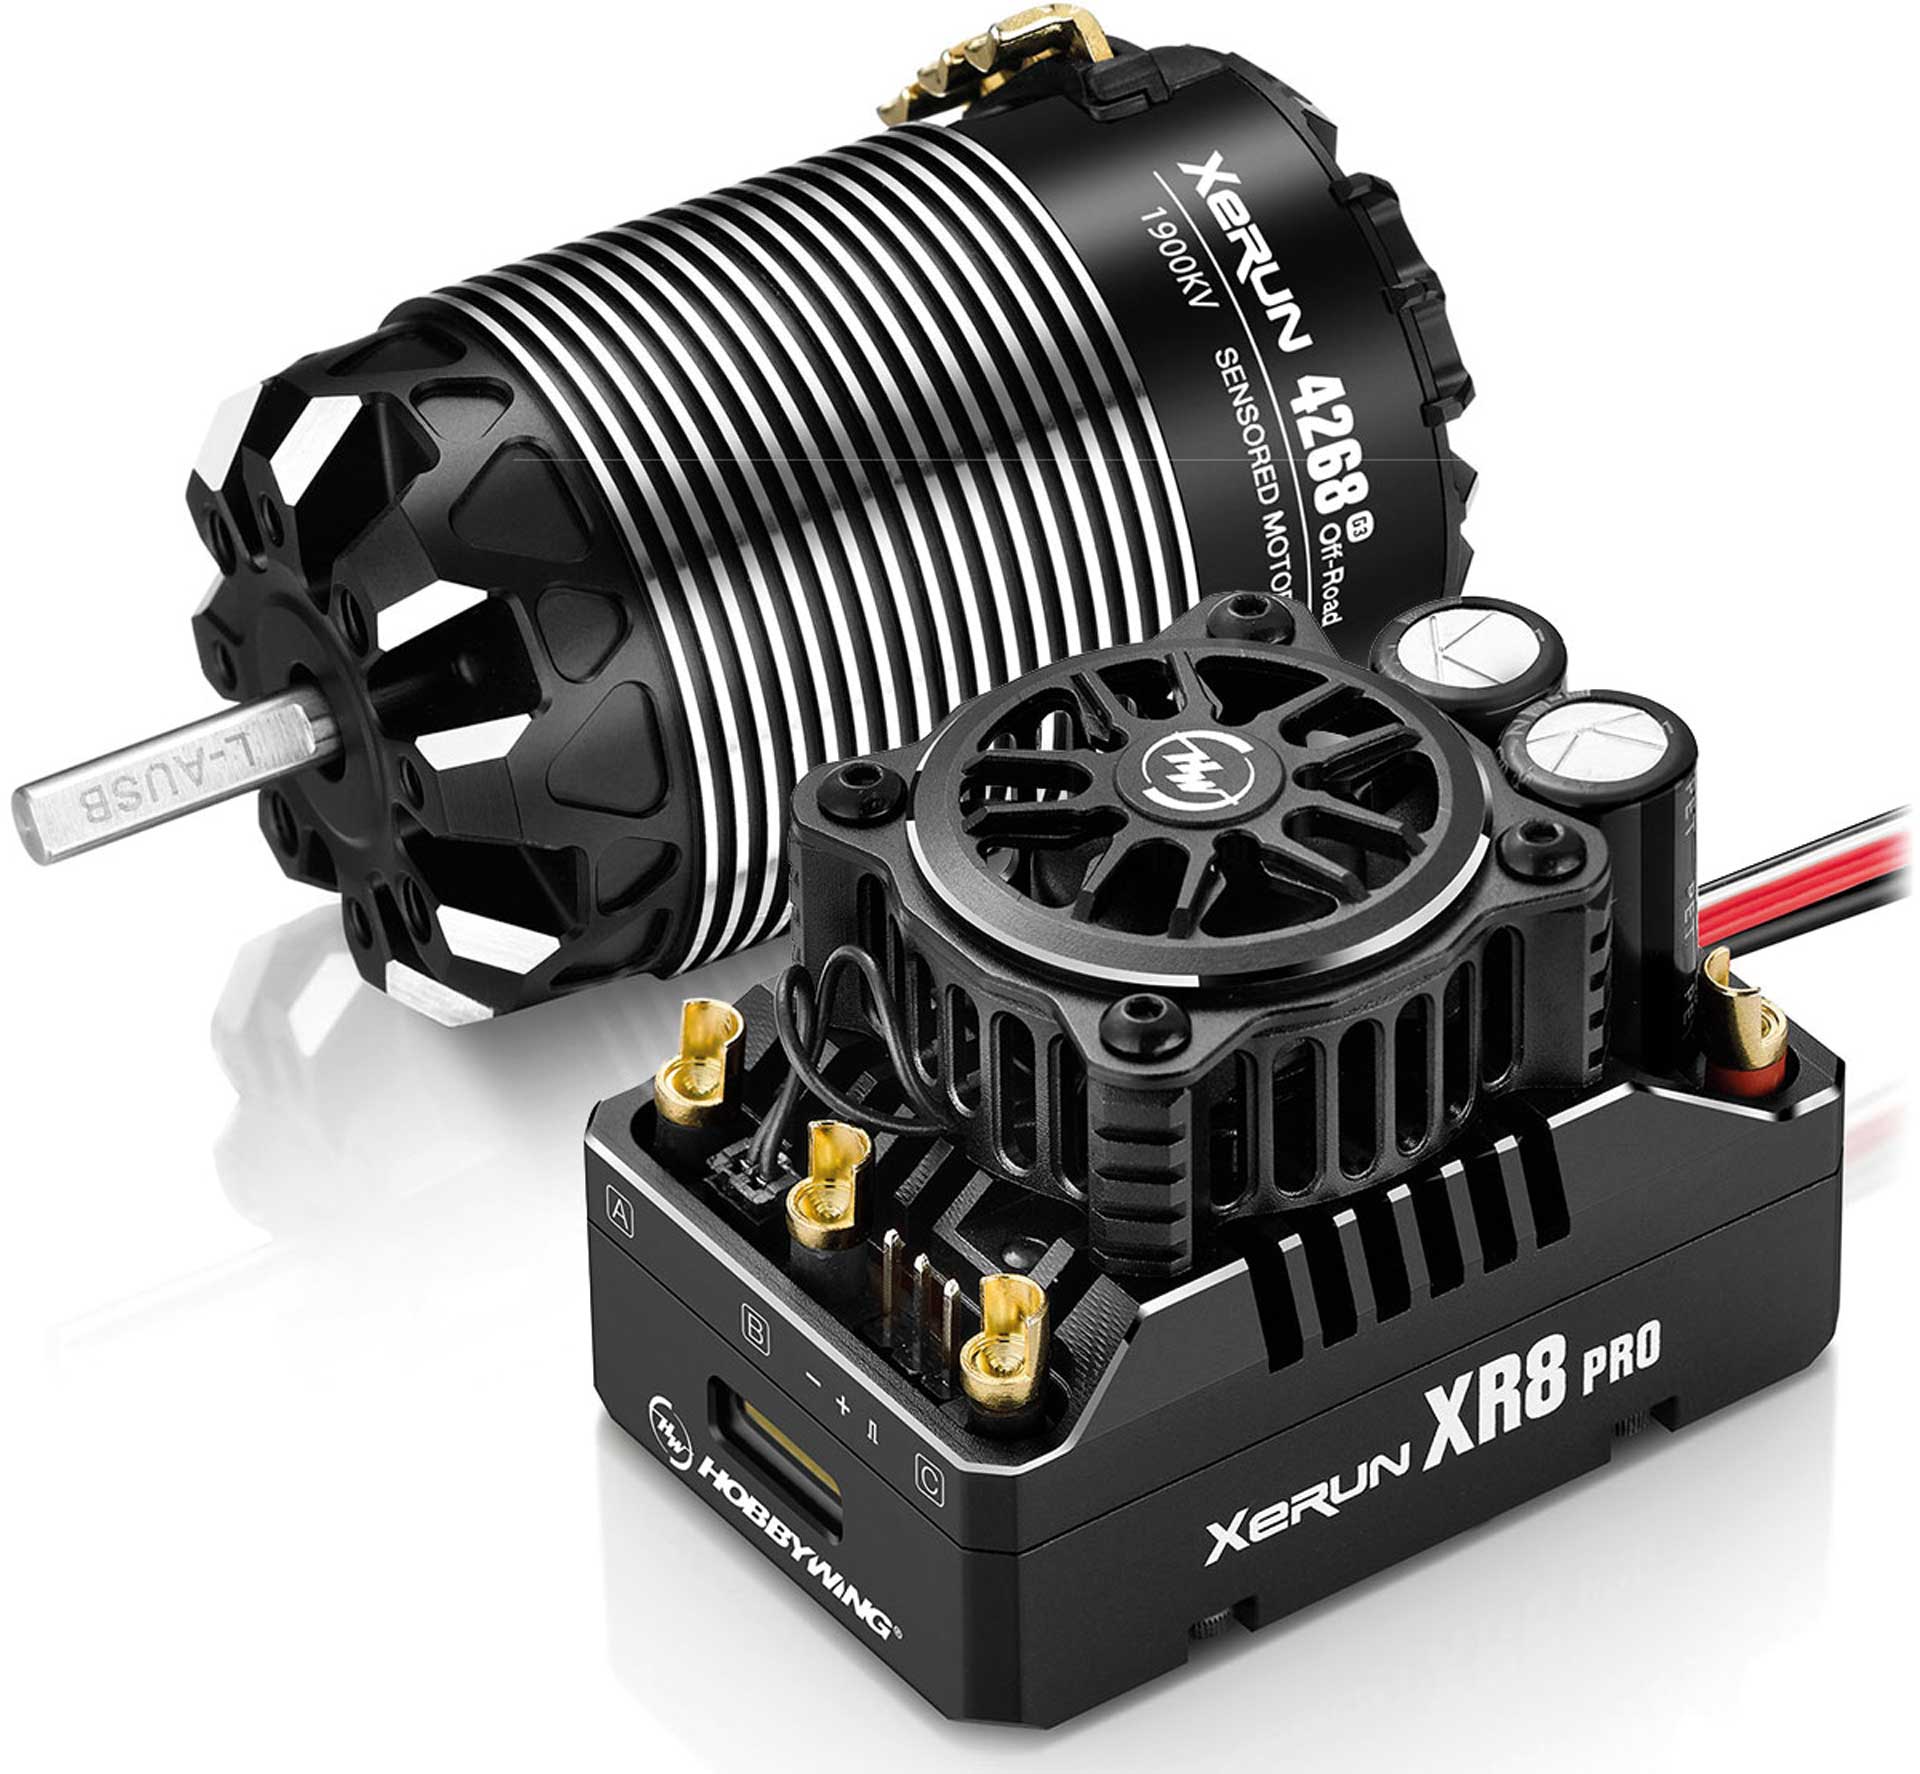 HOBBYWING Xerun XR8 Pro G3 Combo with 4268SD 1900kV G3 Engine Off-Road